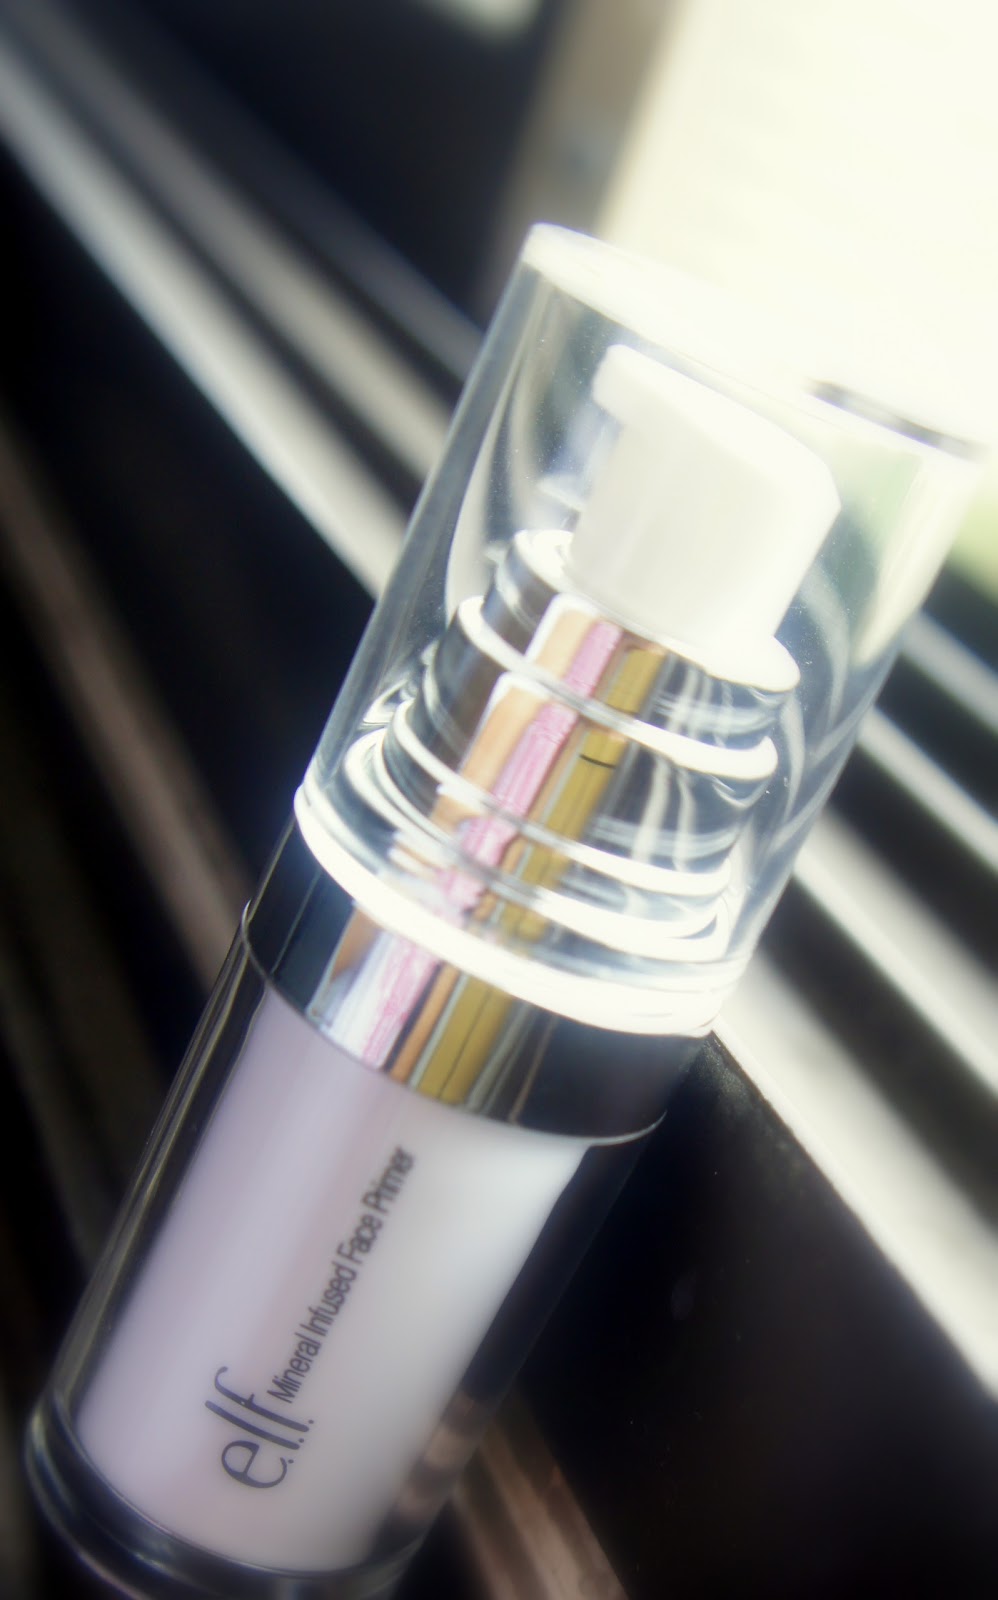 ELF Mineral Infused Face Primer in Clear Product Review